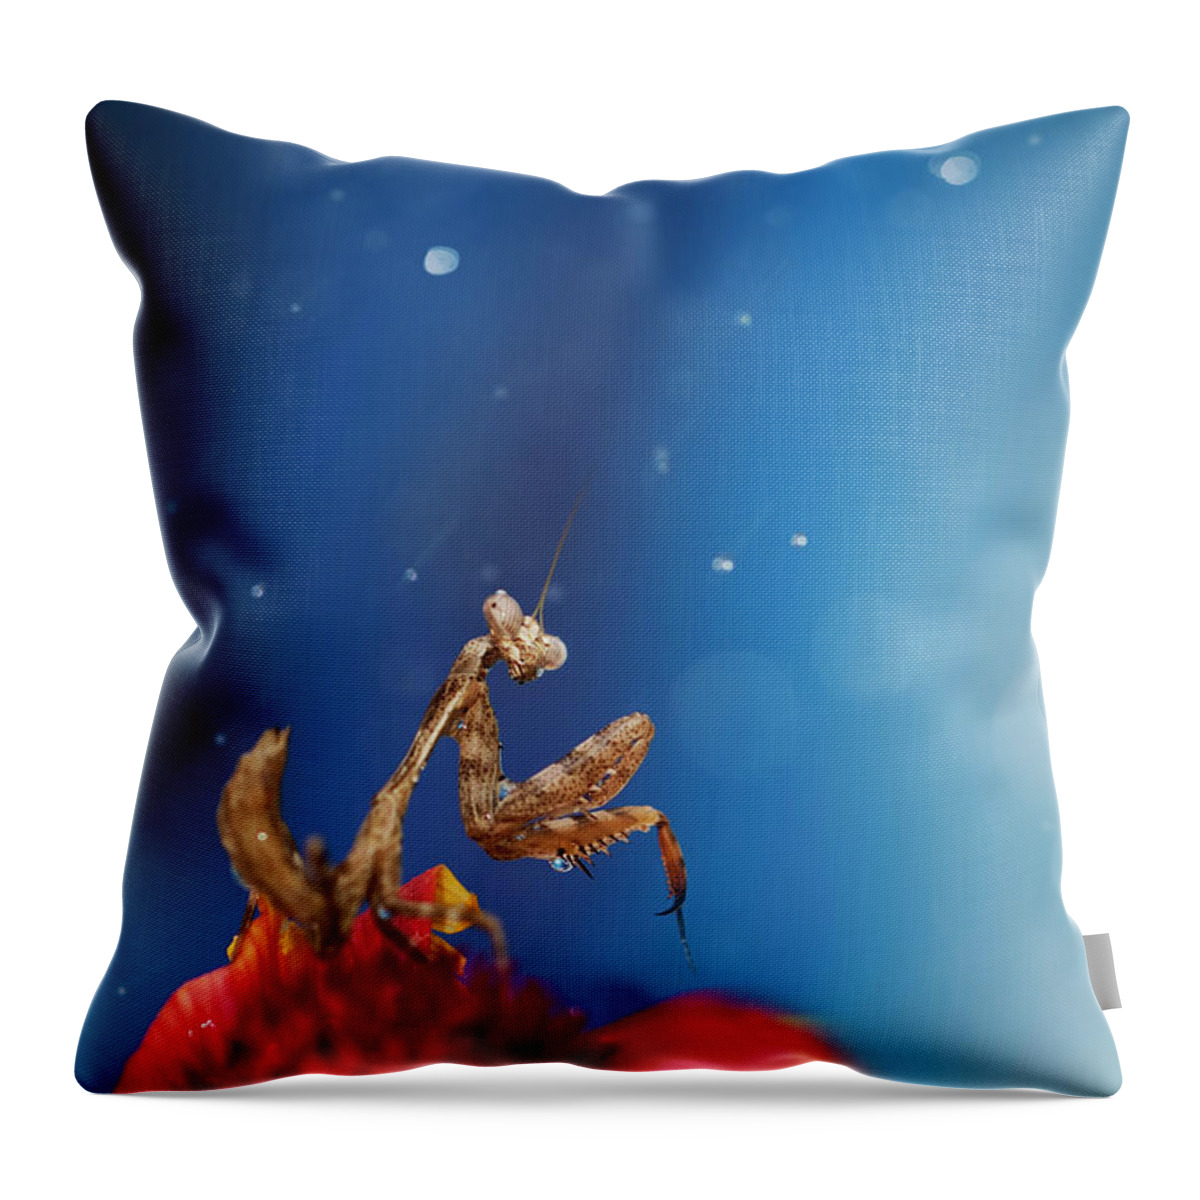 Tanzania Throw Pillow featuring the photograph Praying Mantis In Rain by Twomeows